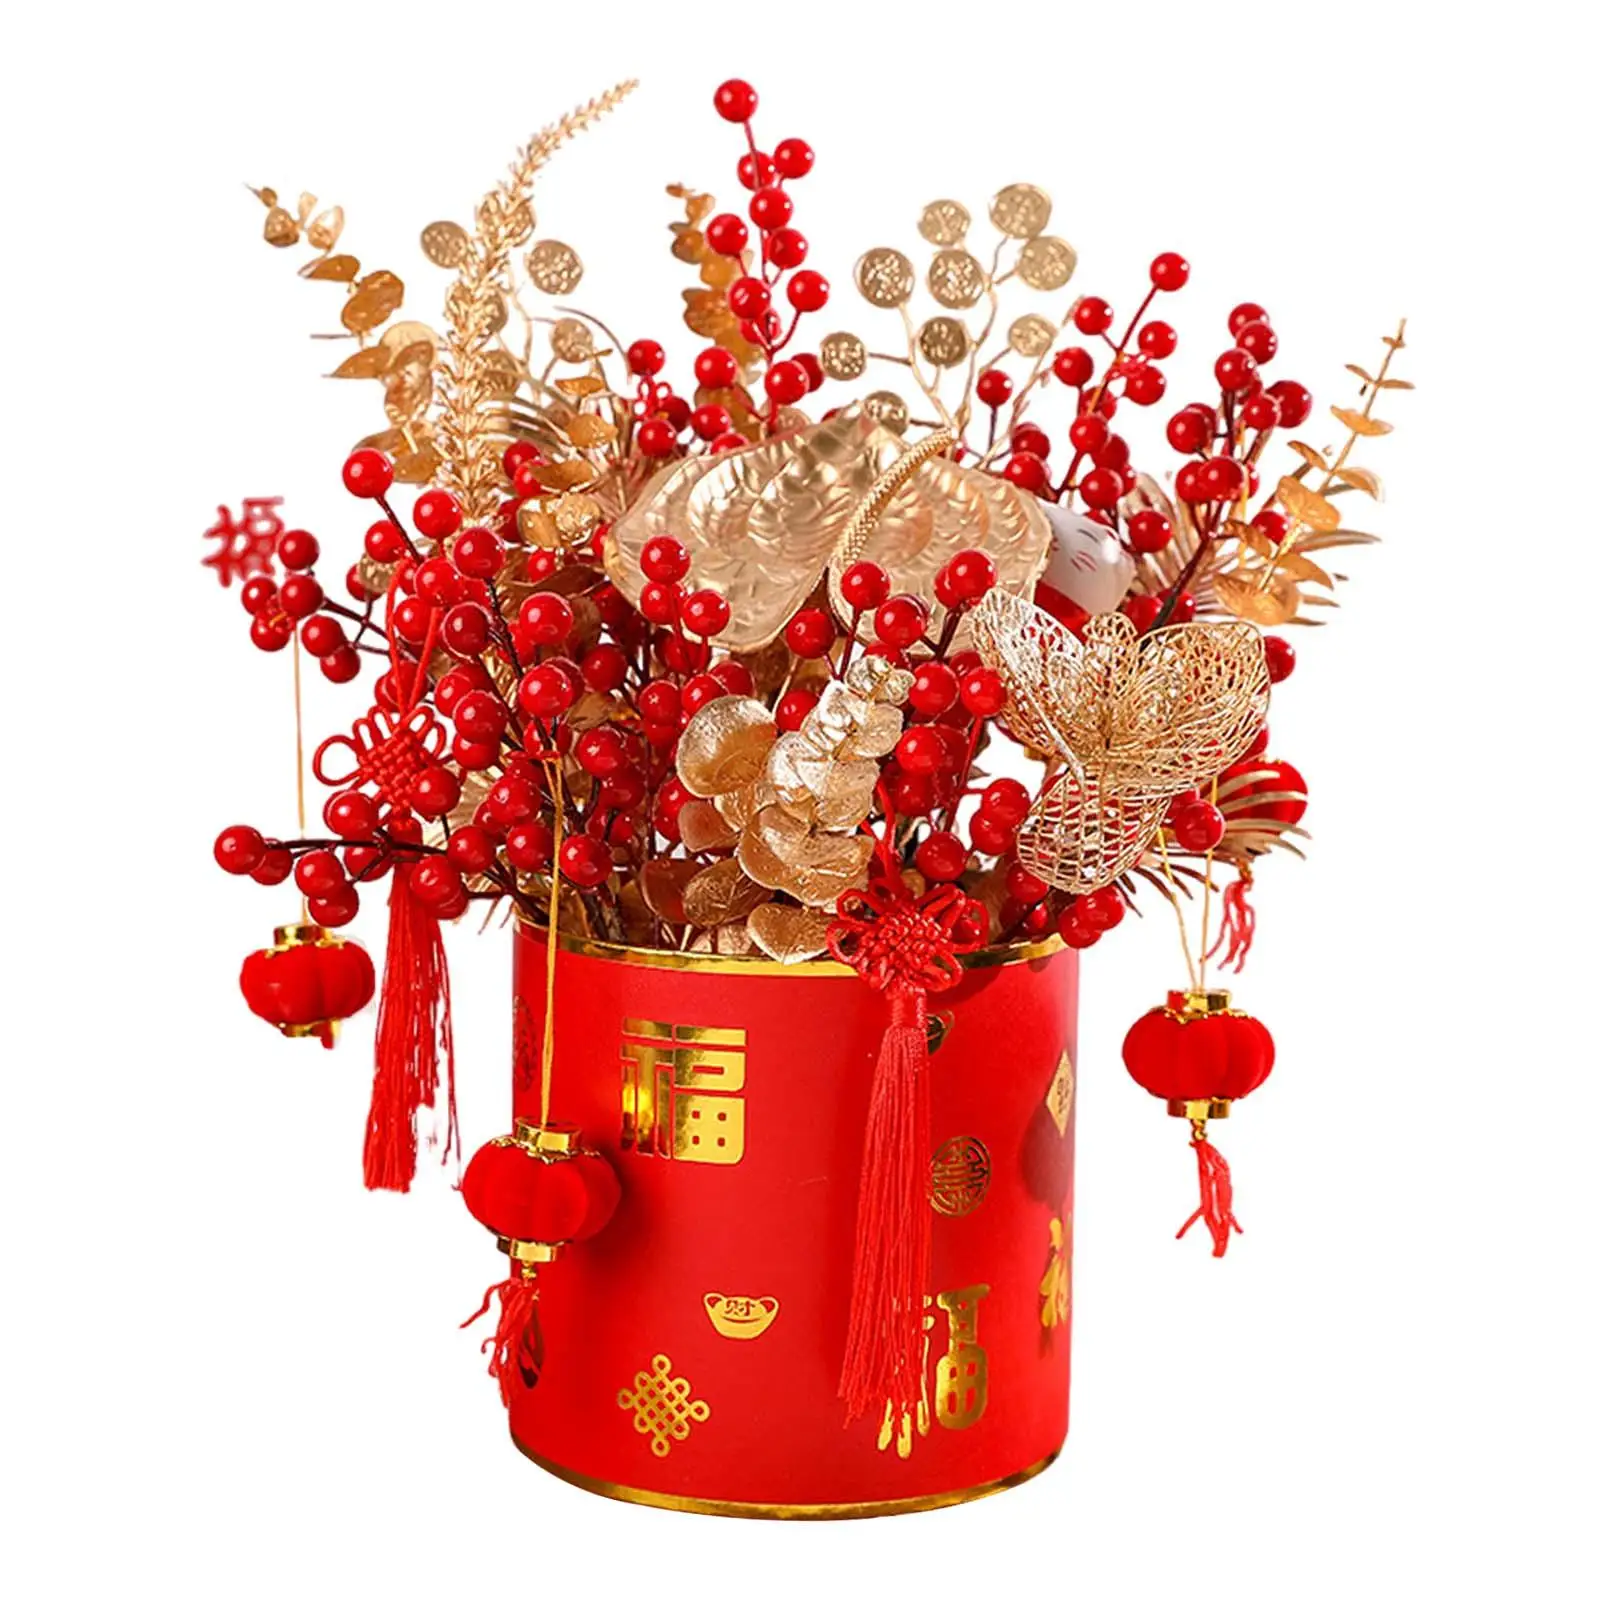 Simulation Berries Flowerpot Chinese New Year Table Decoration for Bonsai Kitchen Countertop Festival Gift Collectible